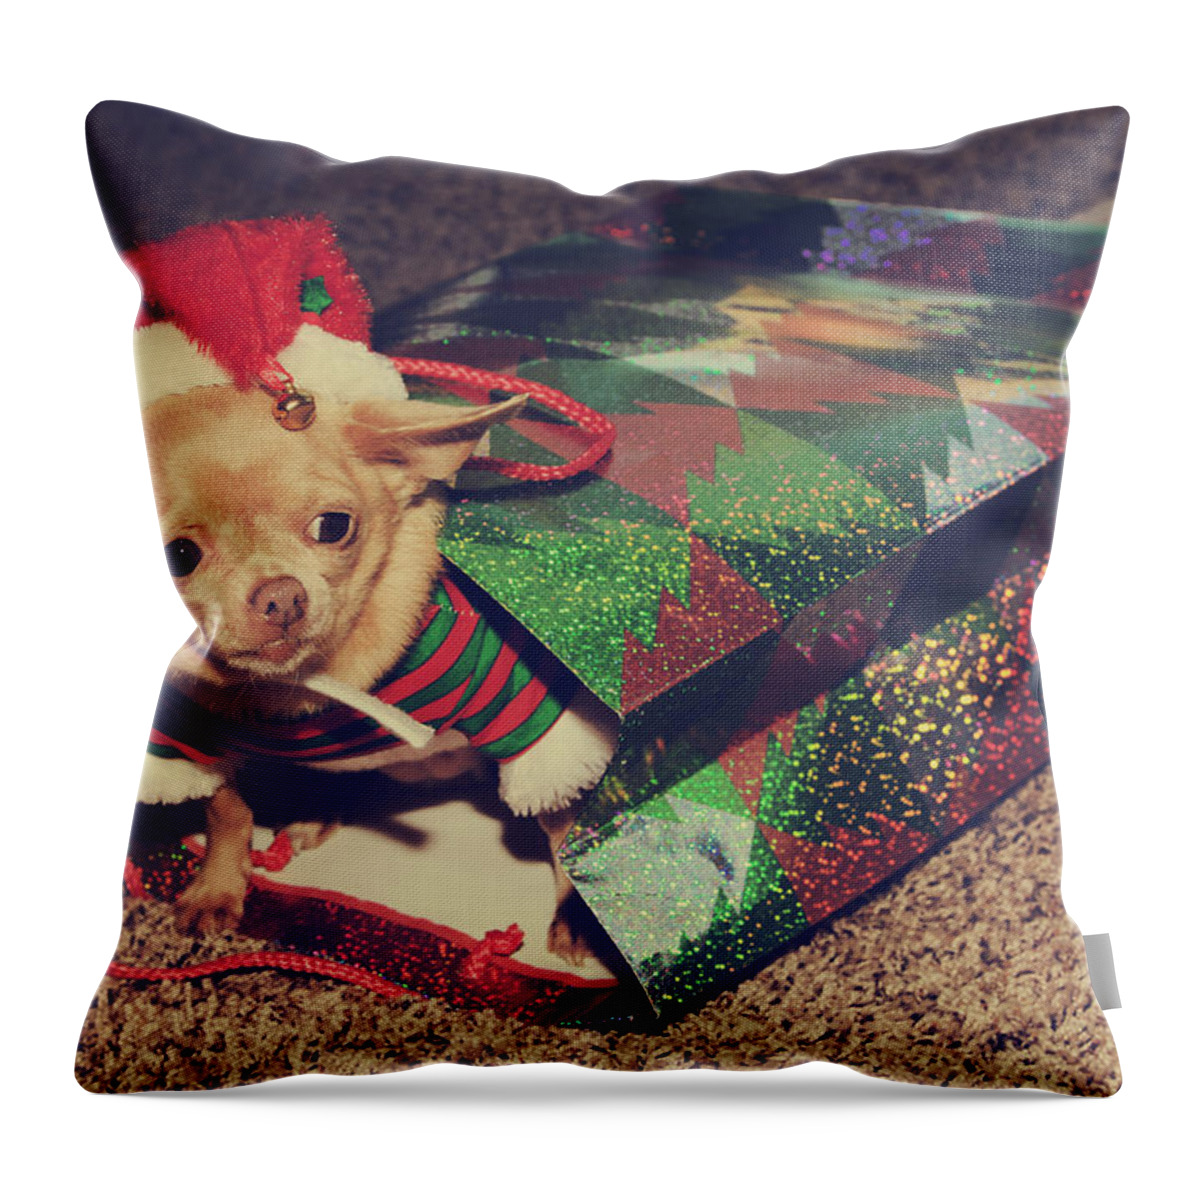 Dog Throw Pillow featuring the photograph A Sweet Christmas Surprise by Laurie Search